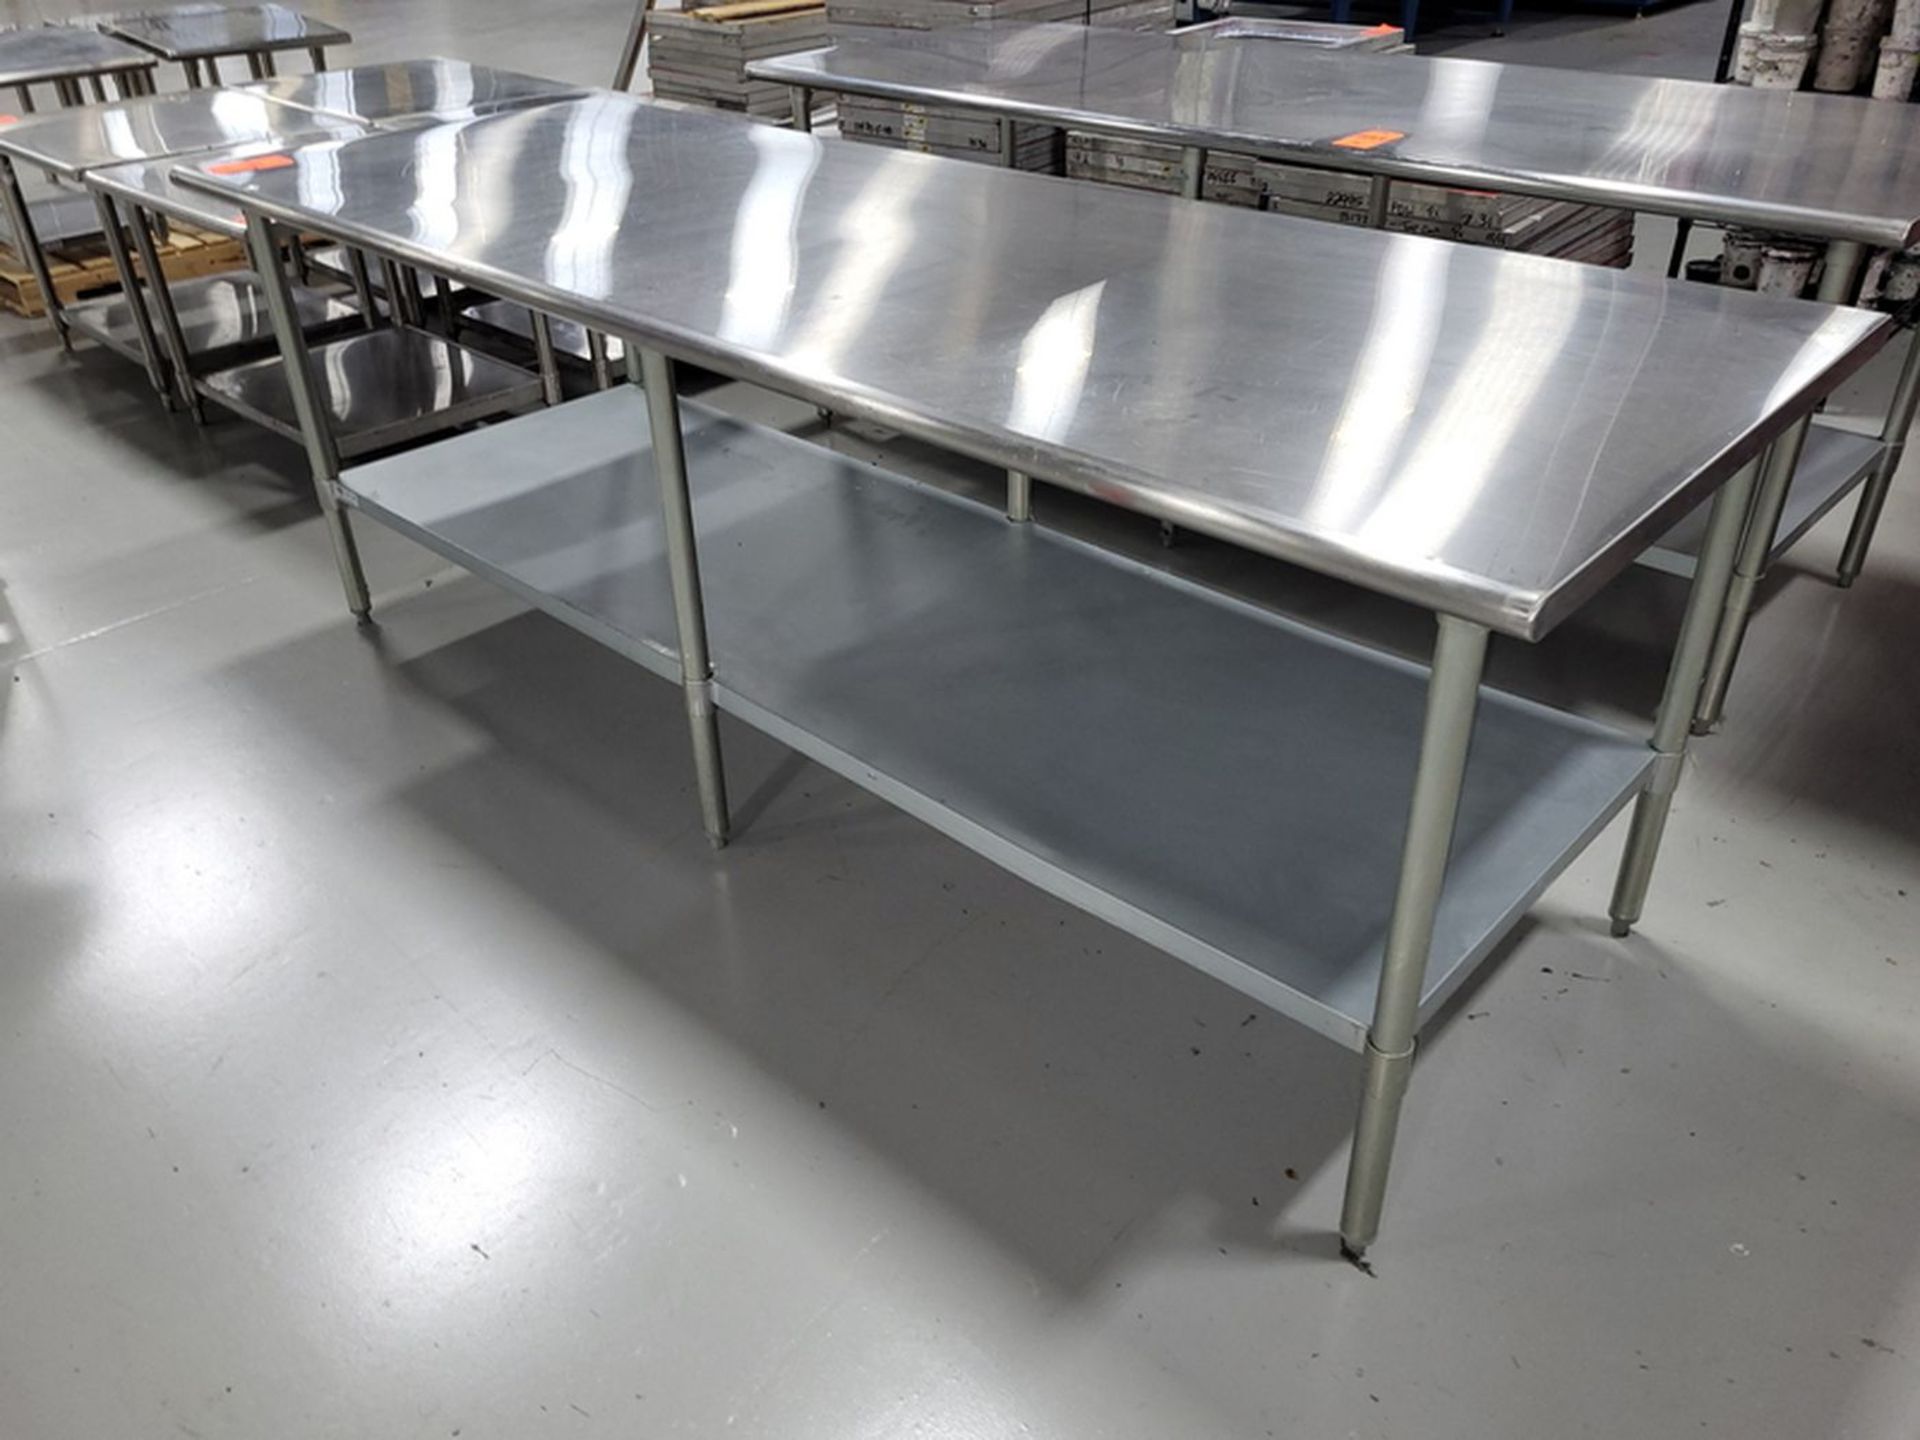 Stainless Steel Table; 8 ft. l x 36 in. d x 35 in. high - Image 2 of 2